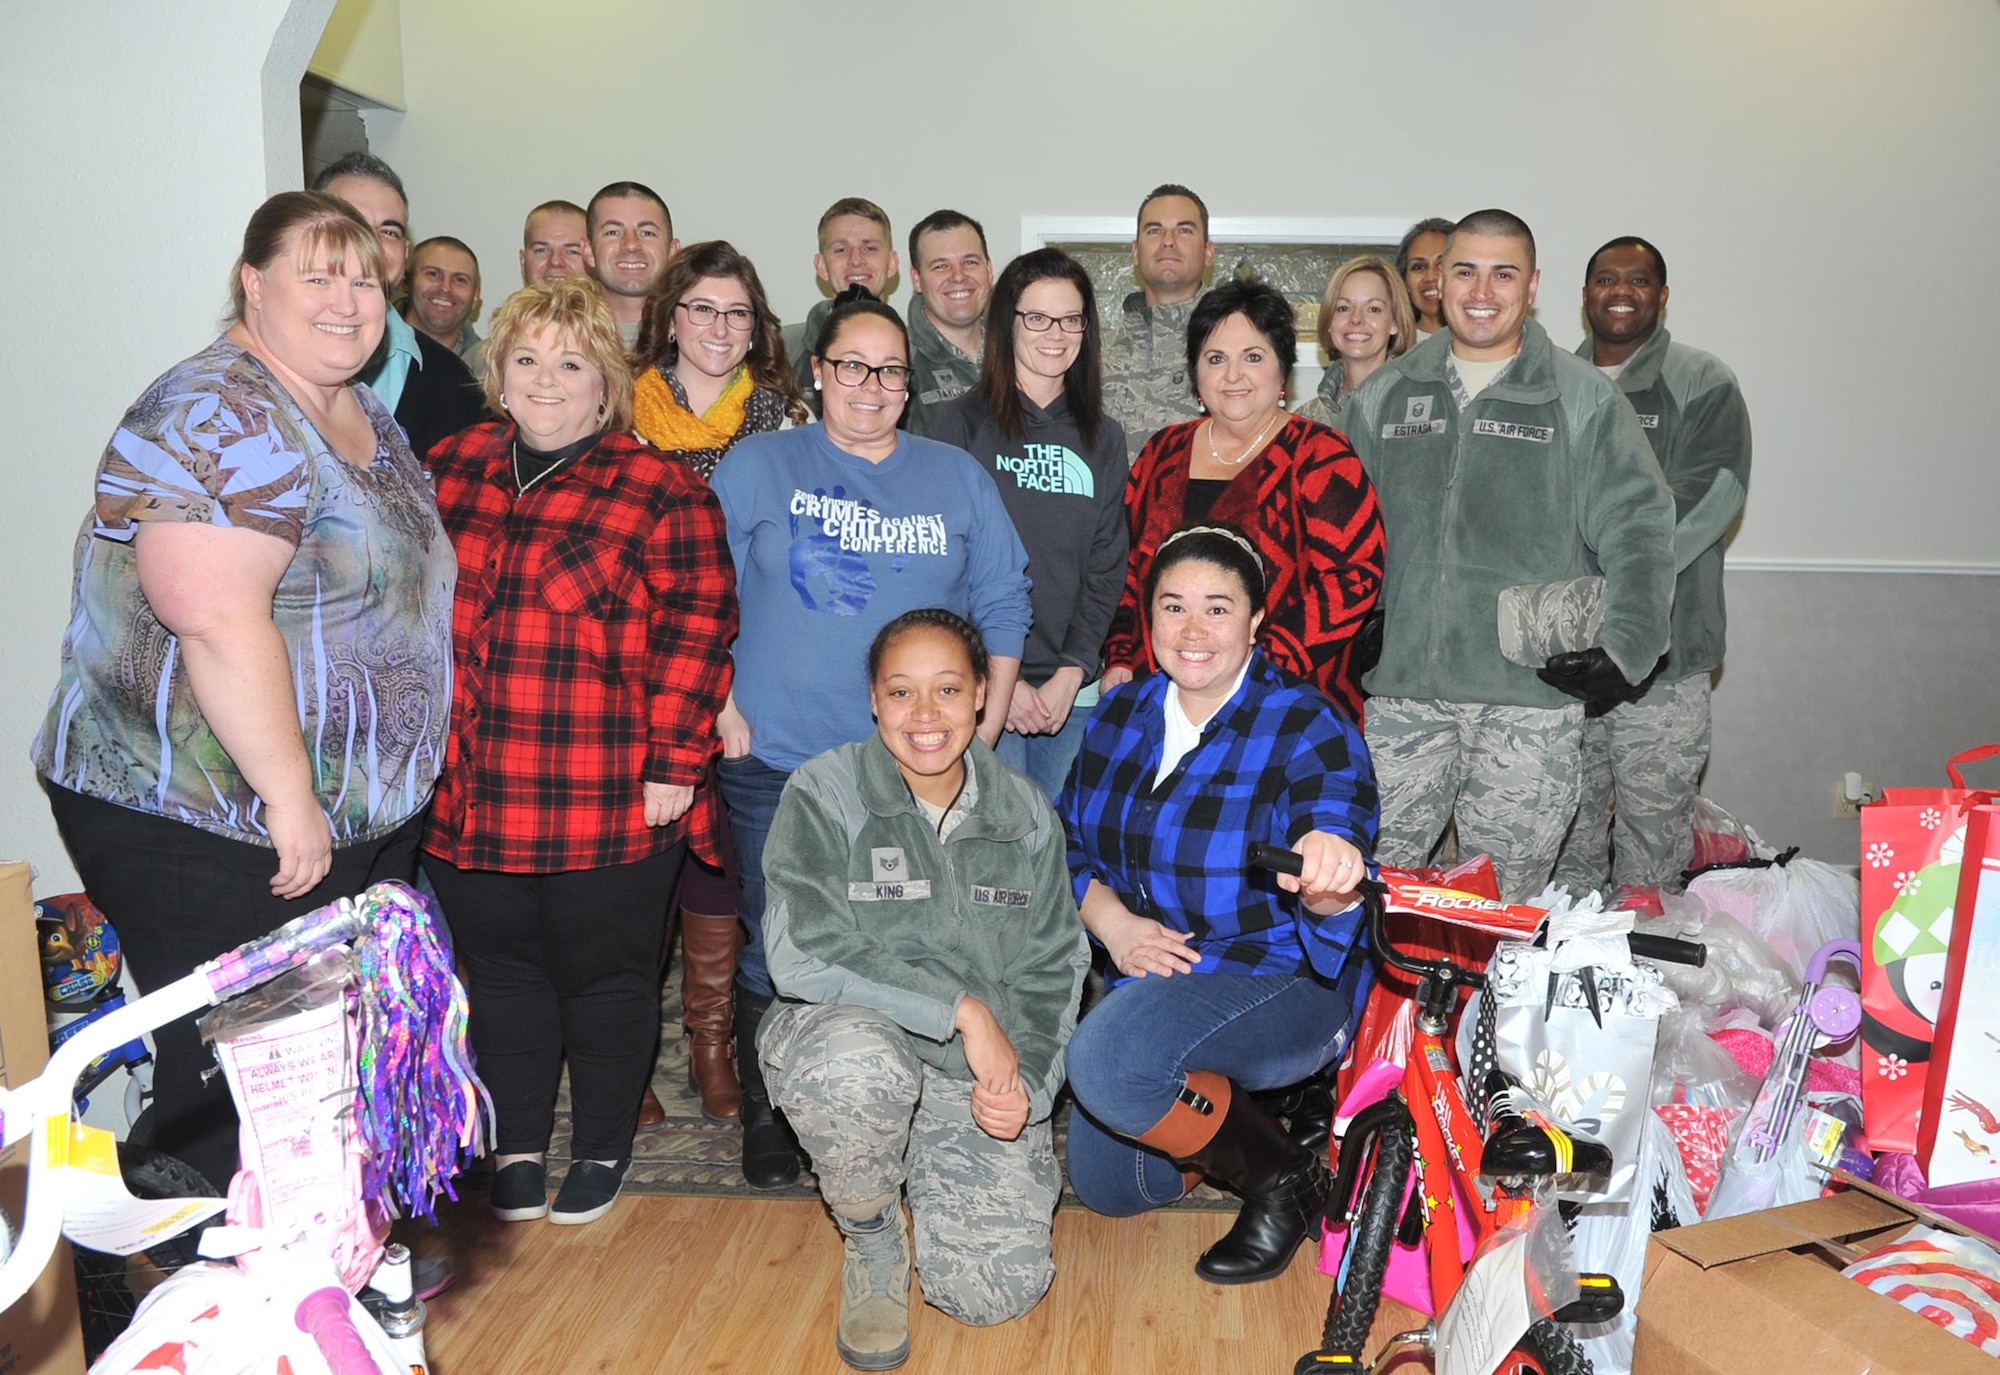 Goodfellow Air Force Base members and Court Appointed Special Advocates for Children center employees at the CASA center, San Angelo, Texas, Dec. 8, 2016. Goodfellow members provided gifts for 340 children in emergency foster care. (U.S. Air Force photo by Staff Sgt. Laura R. McFarlane/Released)